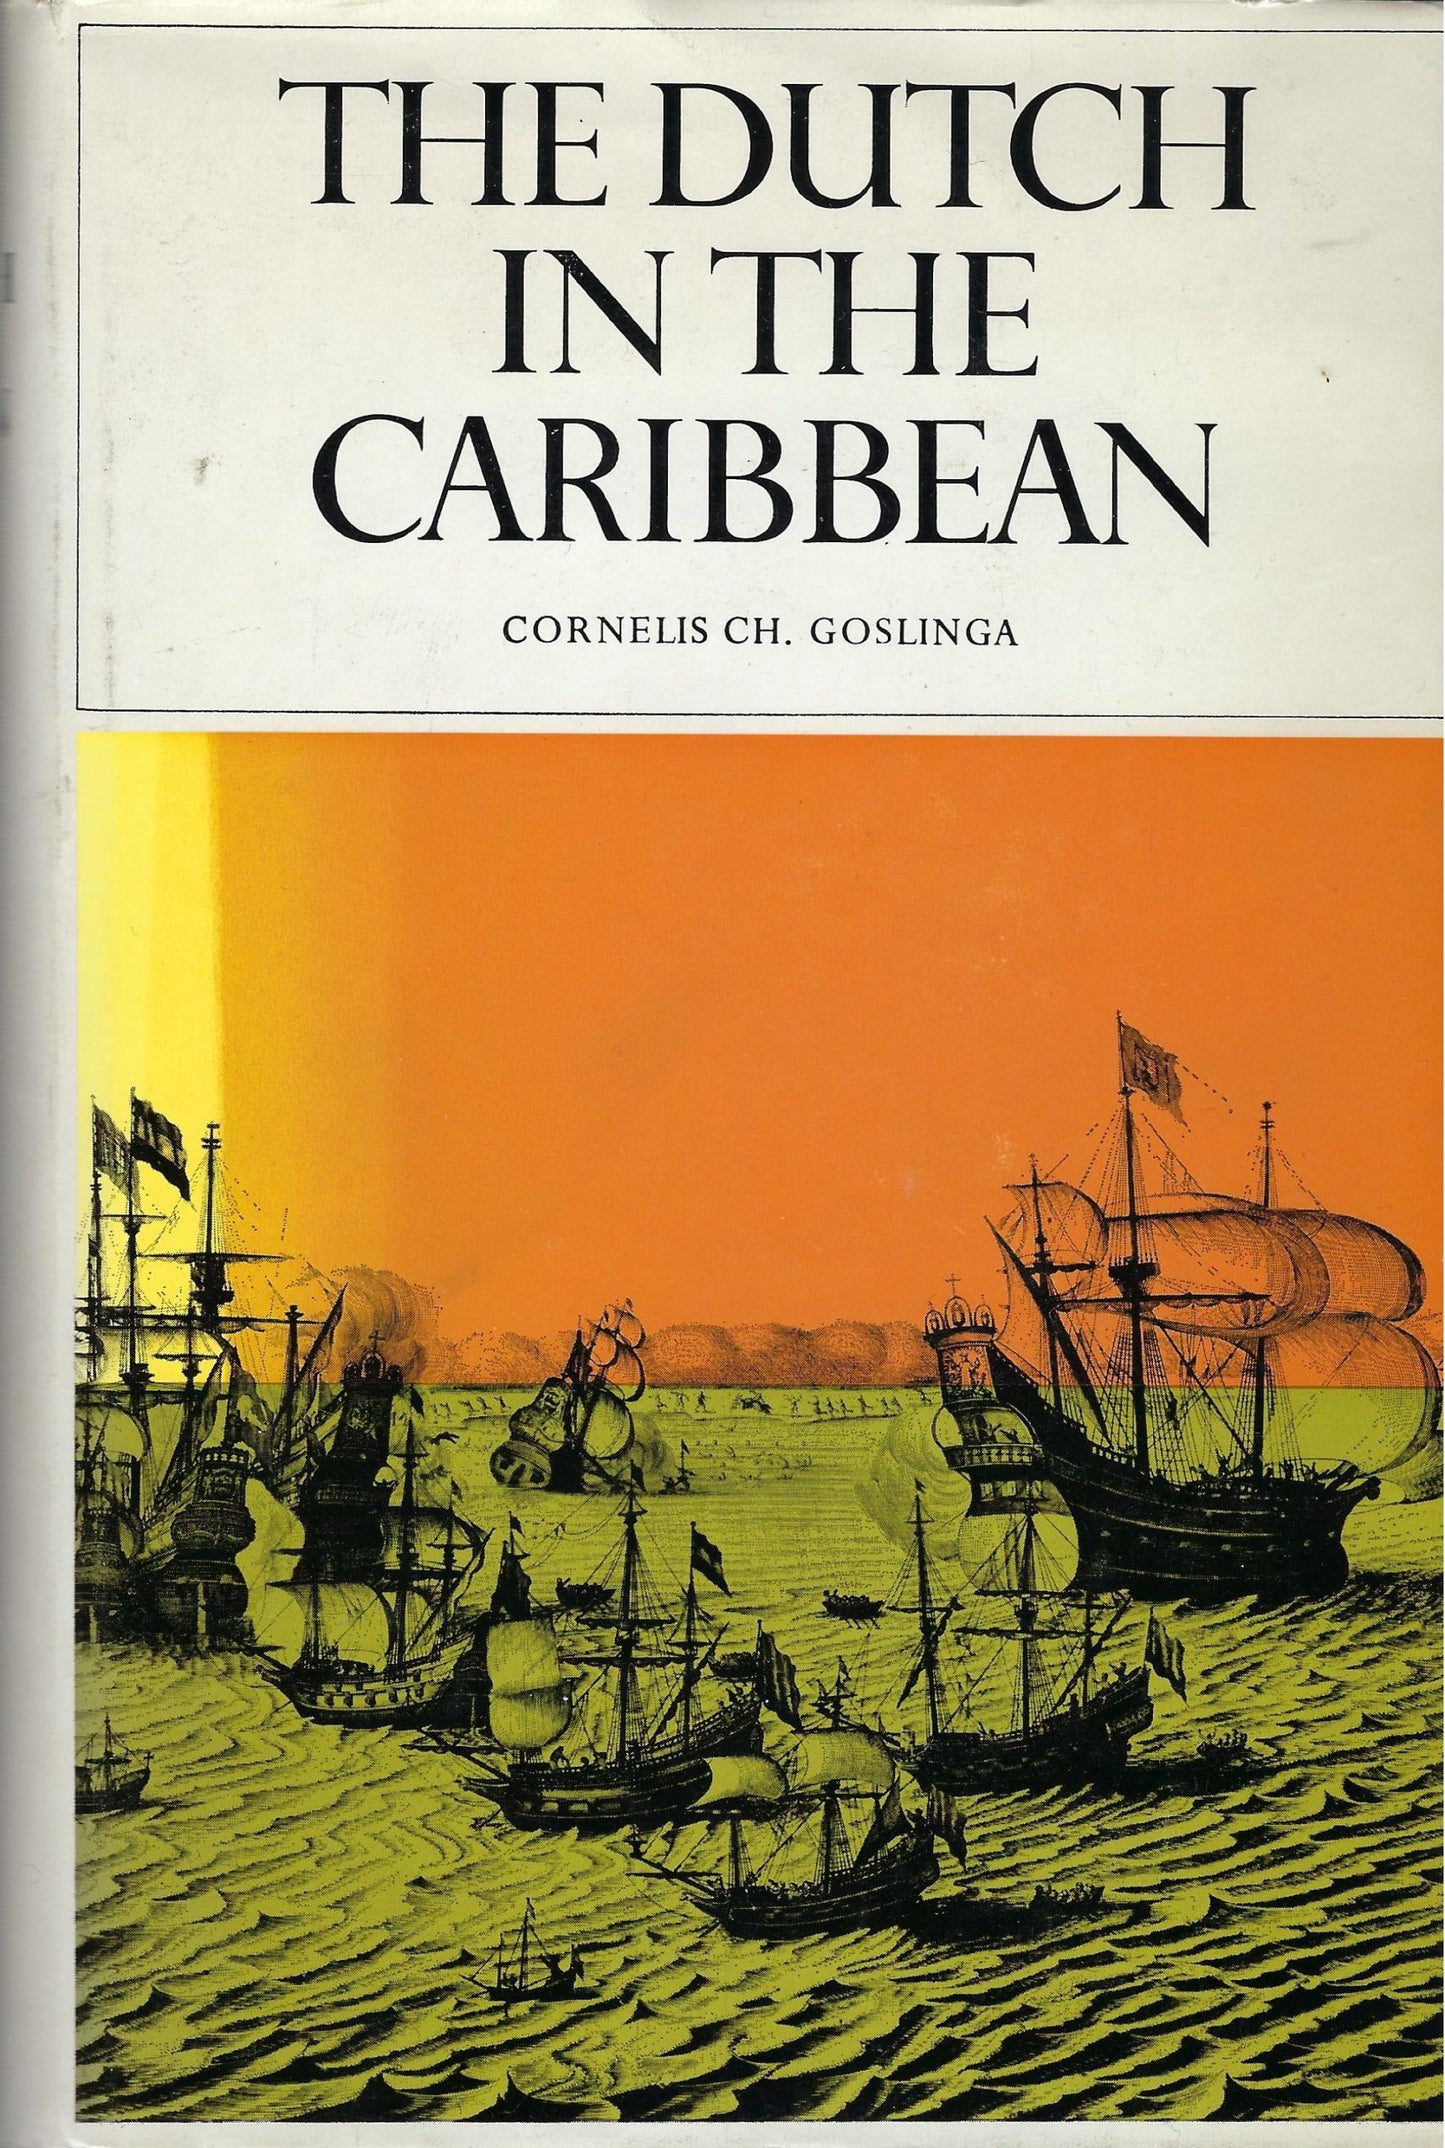 The Dutch in the Caribbean / On the wild coast 1580-1680